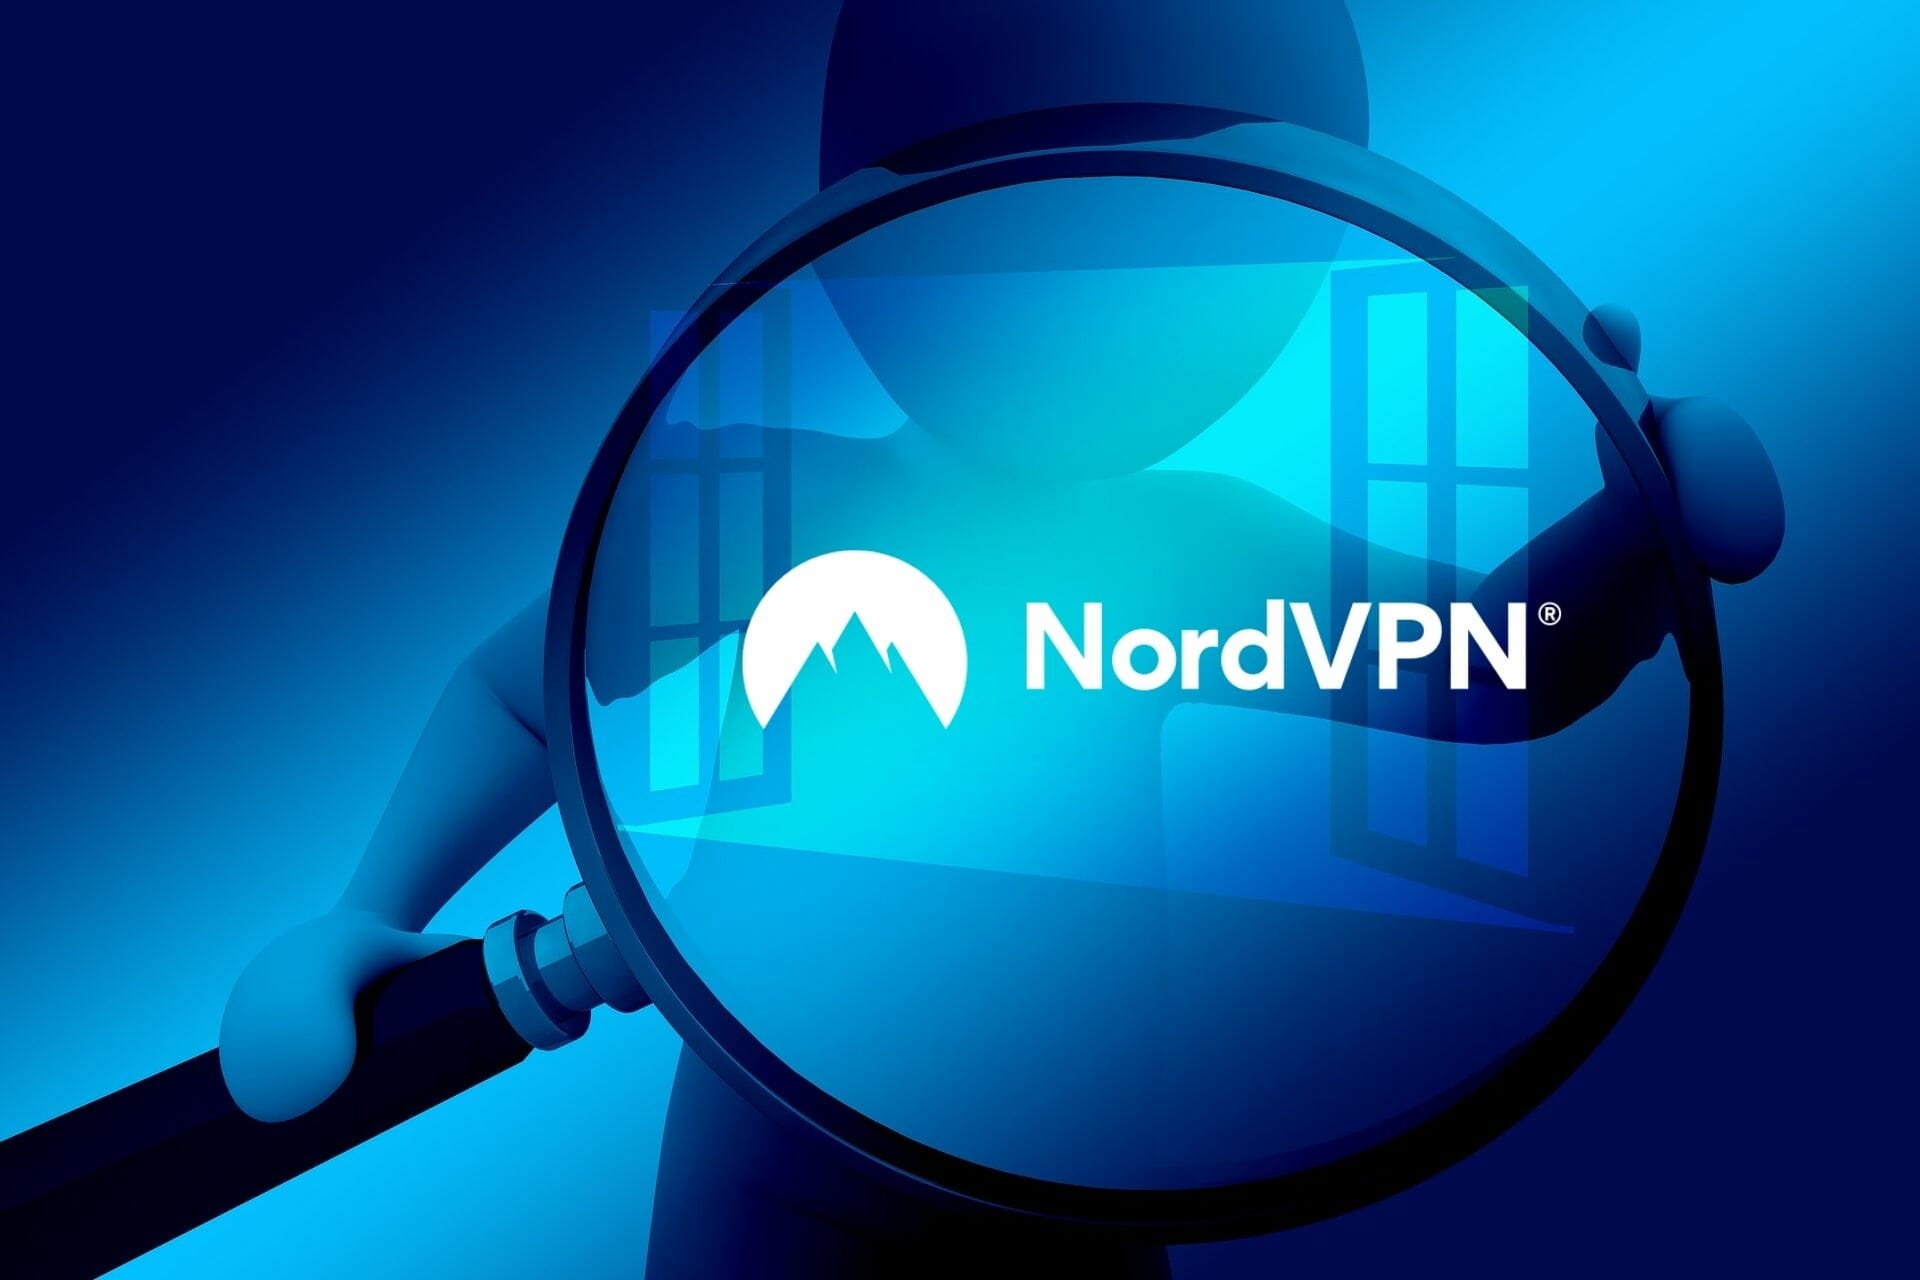 Can NordVPN be tracked?